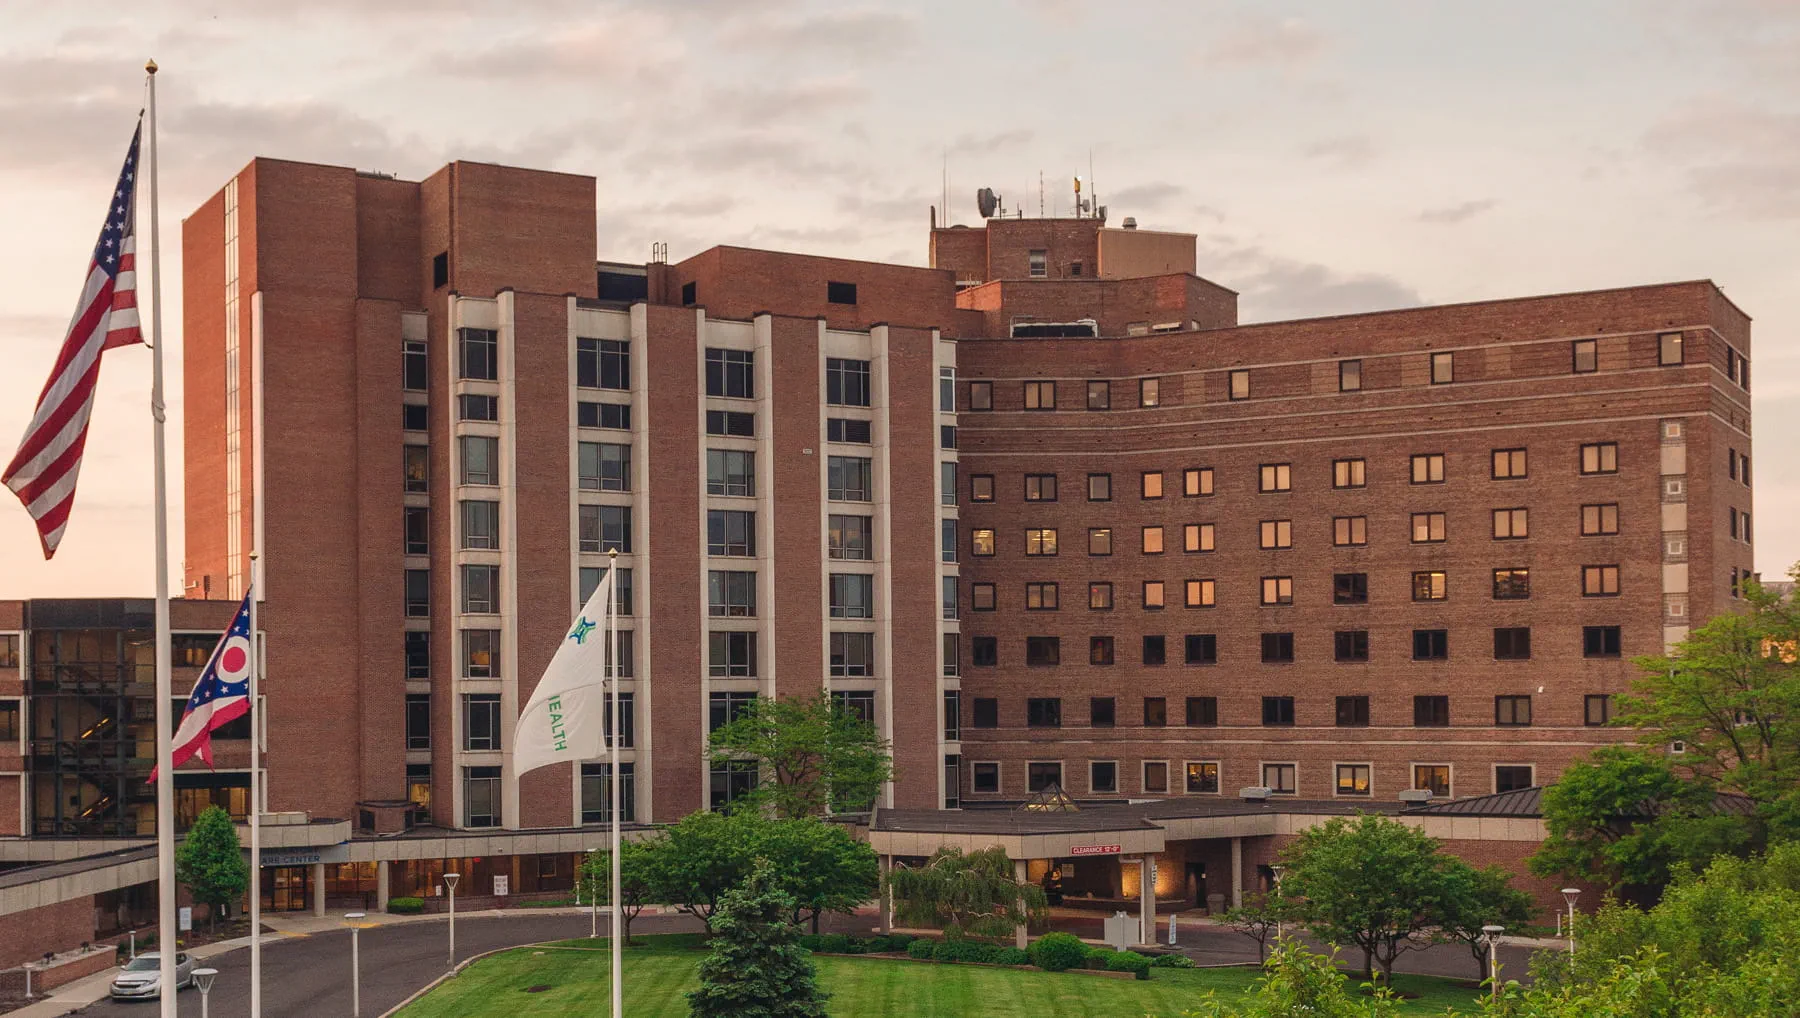 St Charles Mercy Hospital - General Surgery Clinic - Located in Oregon, Ohio serving Northwest Ohio